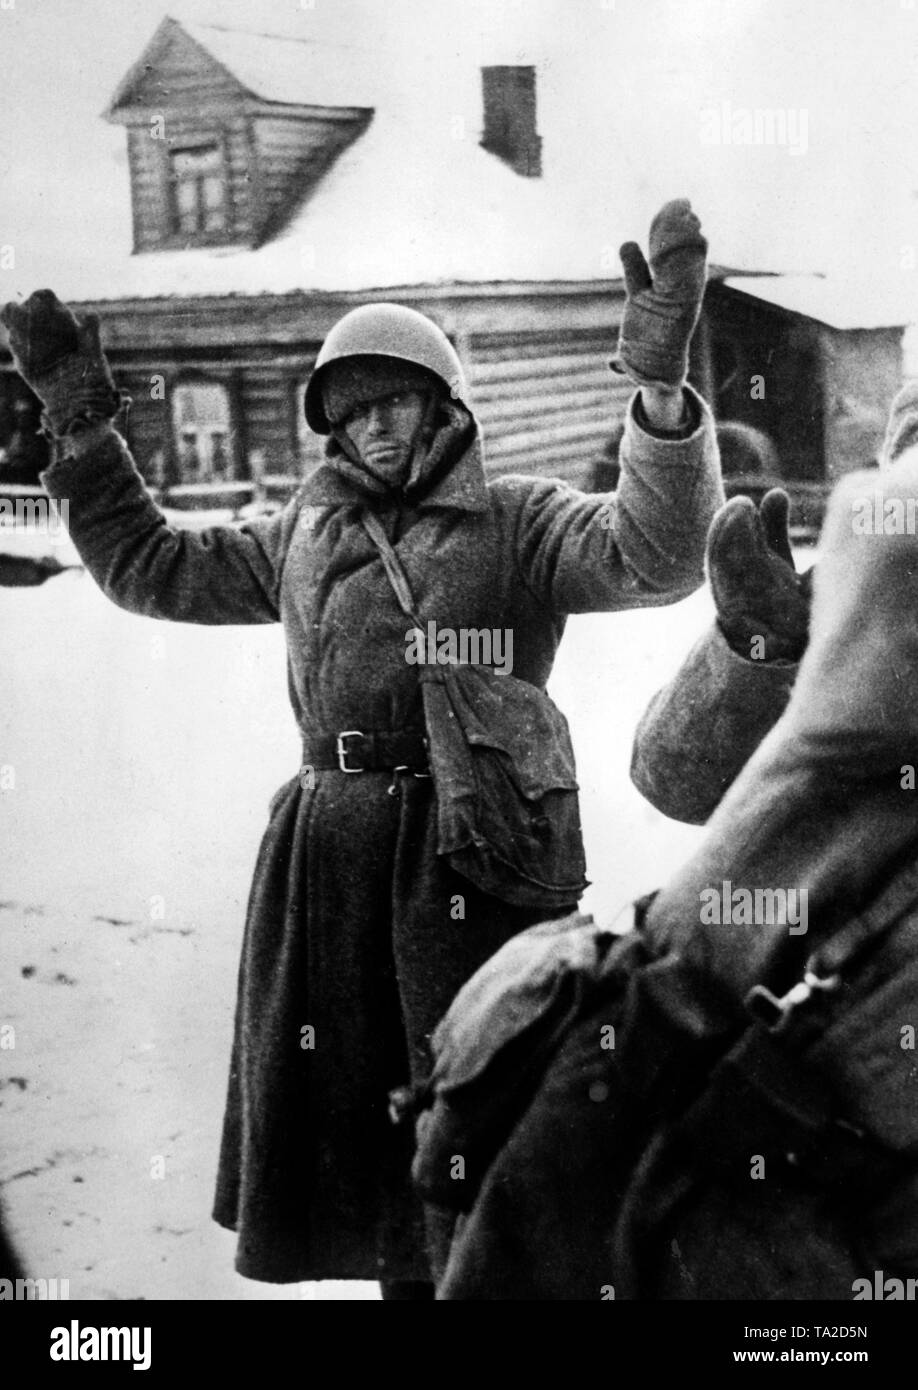 Russian prisoners of war stand with raised arms in front of German soldiers. Probably the picture was taken in a small city west of Moscow, during the retreat of the Wehrmacht. (PK photo: war correspondent Bauer). Stock Photo